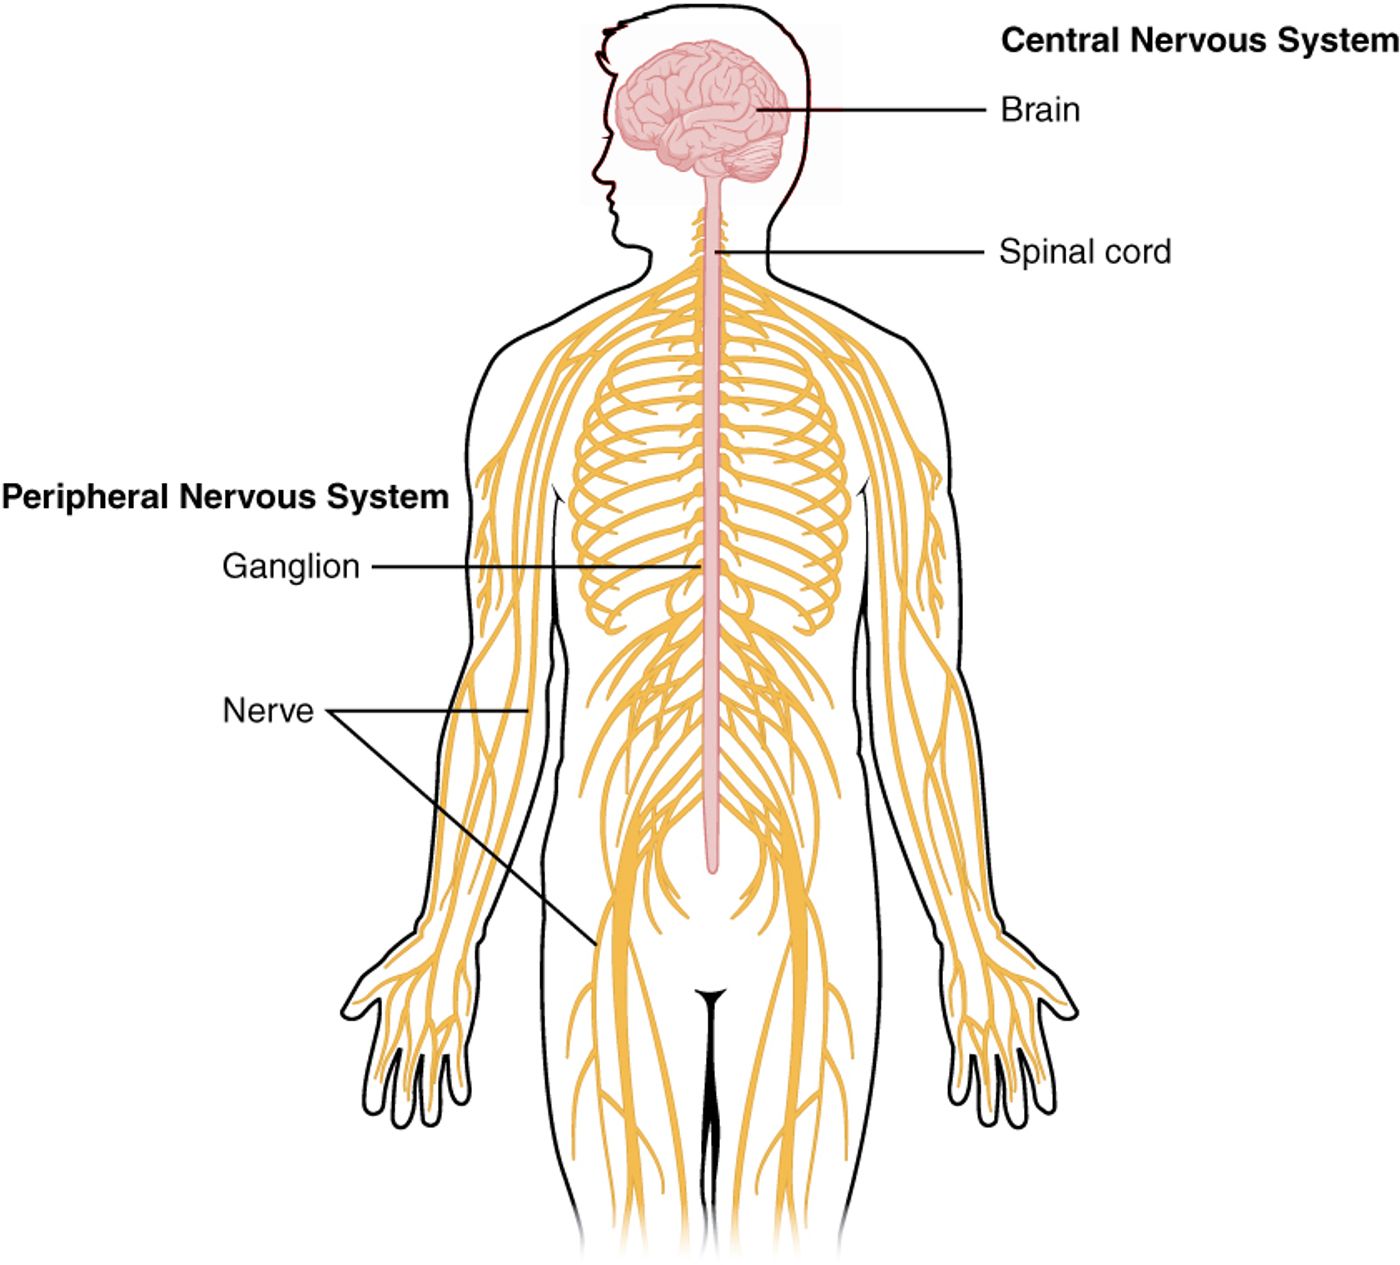 A diagram of the peripheral and central nervous systems from Wikipedia